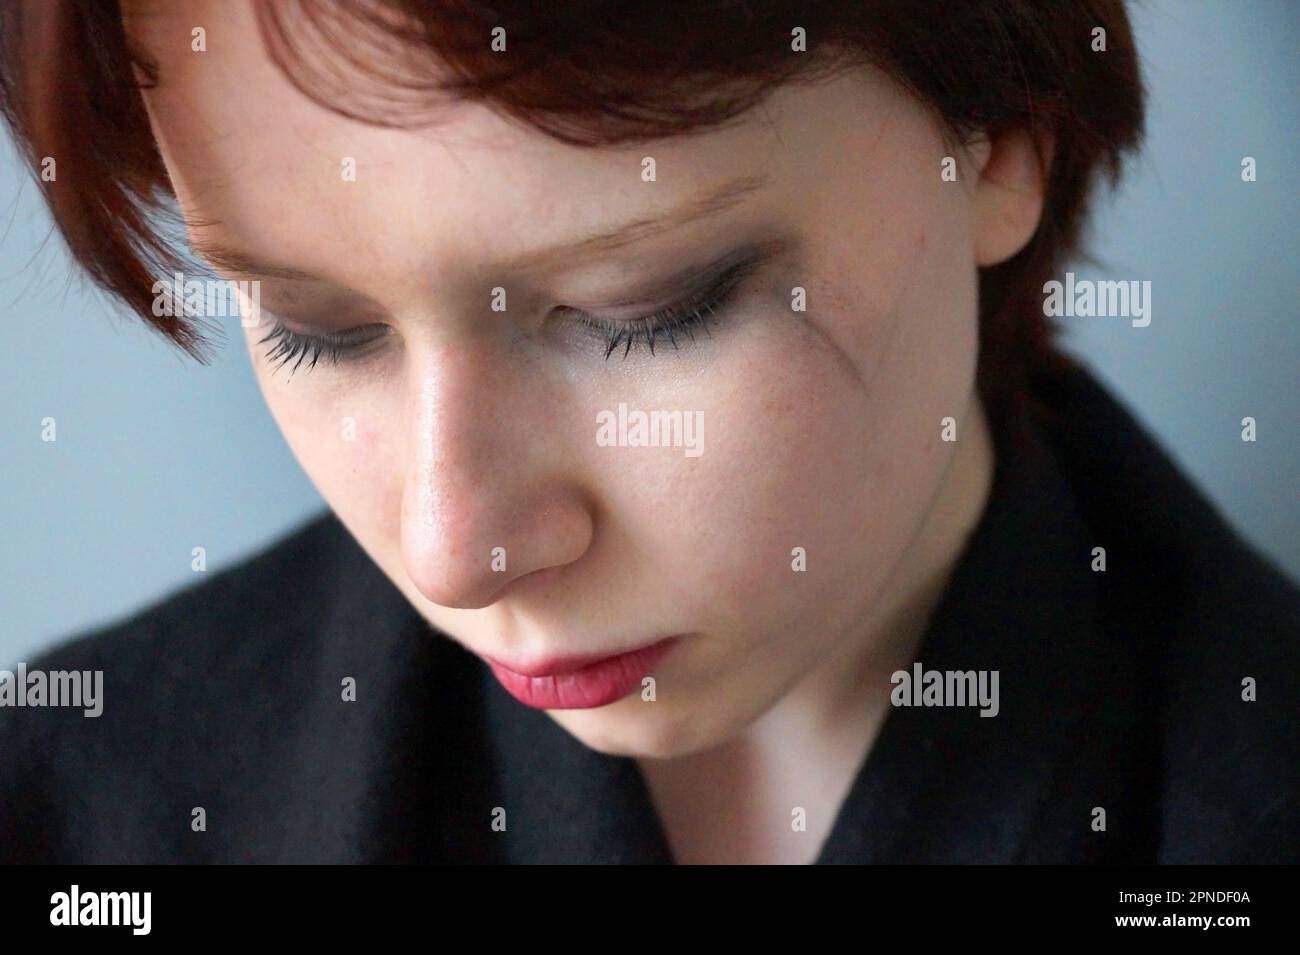 portrait of a sad teenager girl with closed eyes with mascara smeared from tears. Stock Photo